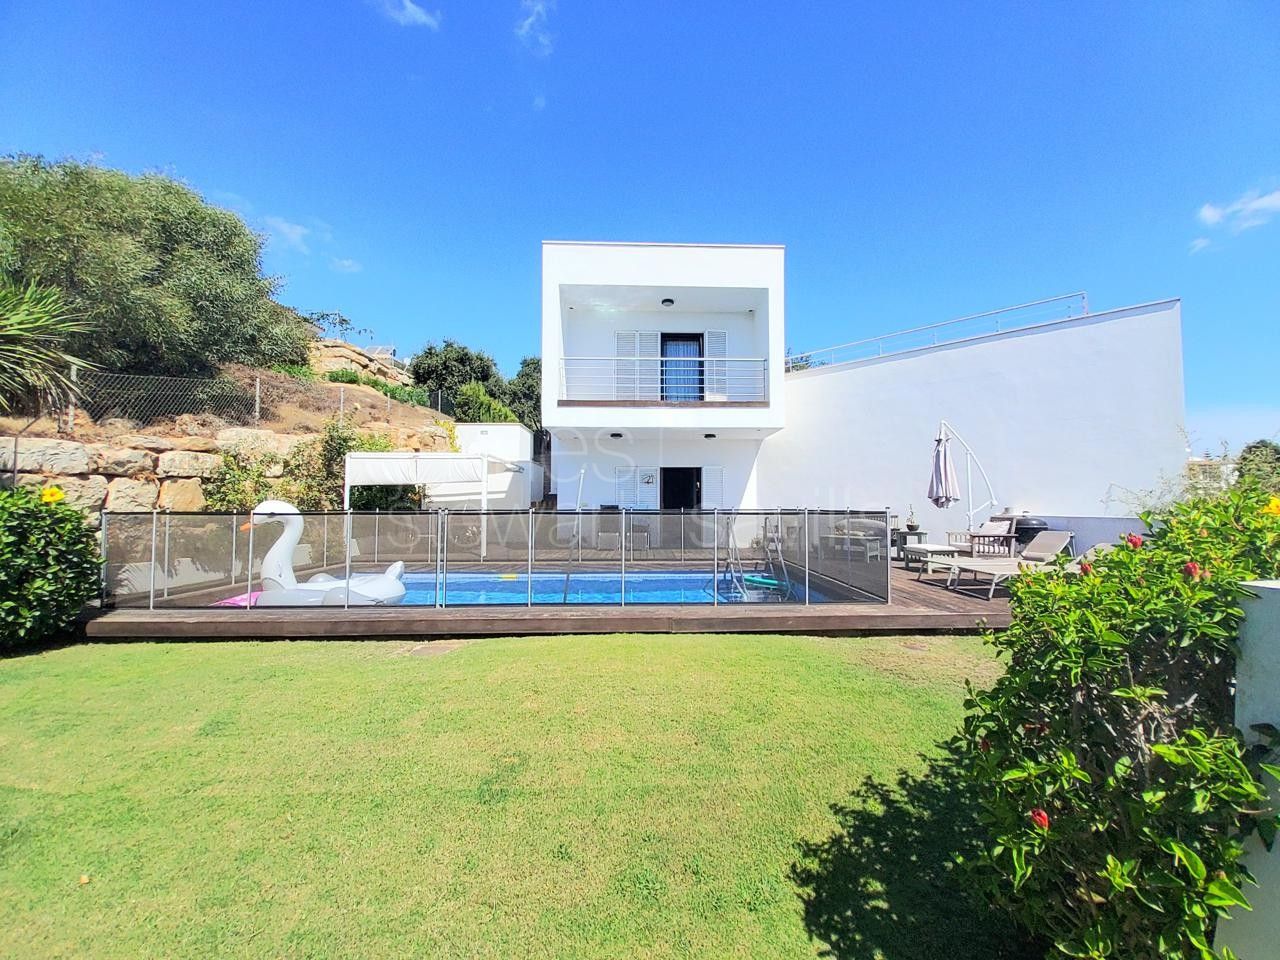 Contemporary villa with elevated sea views from Estepona to Gibraltar